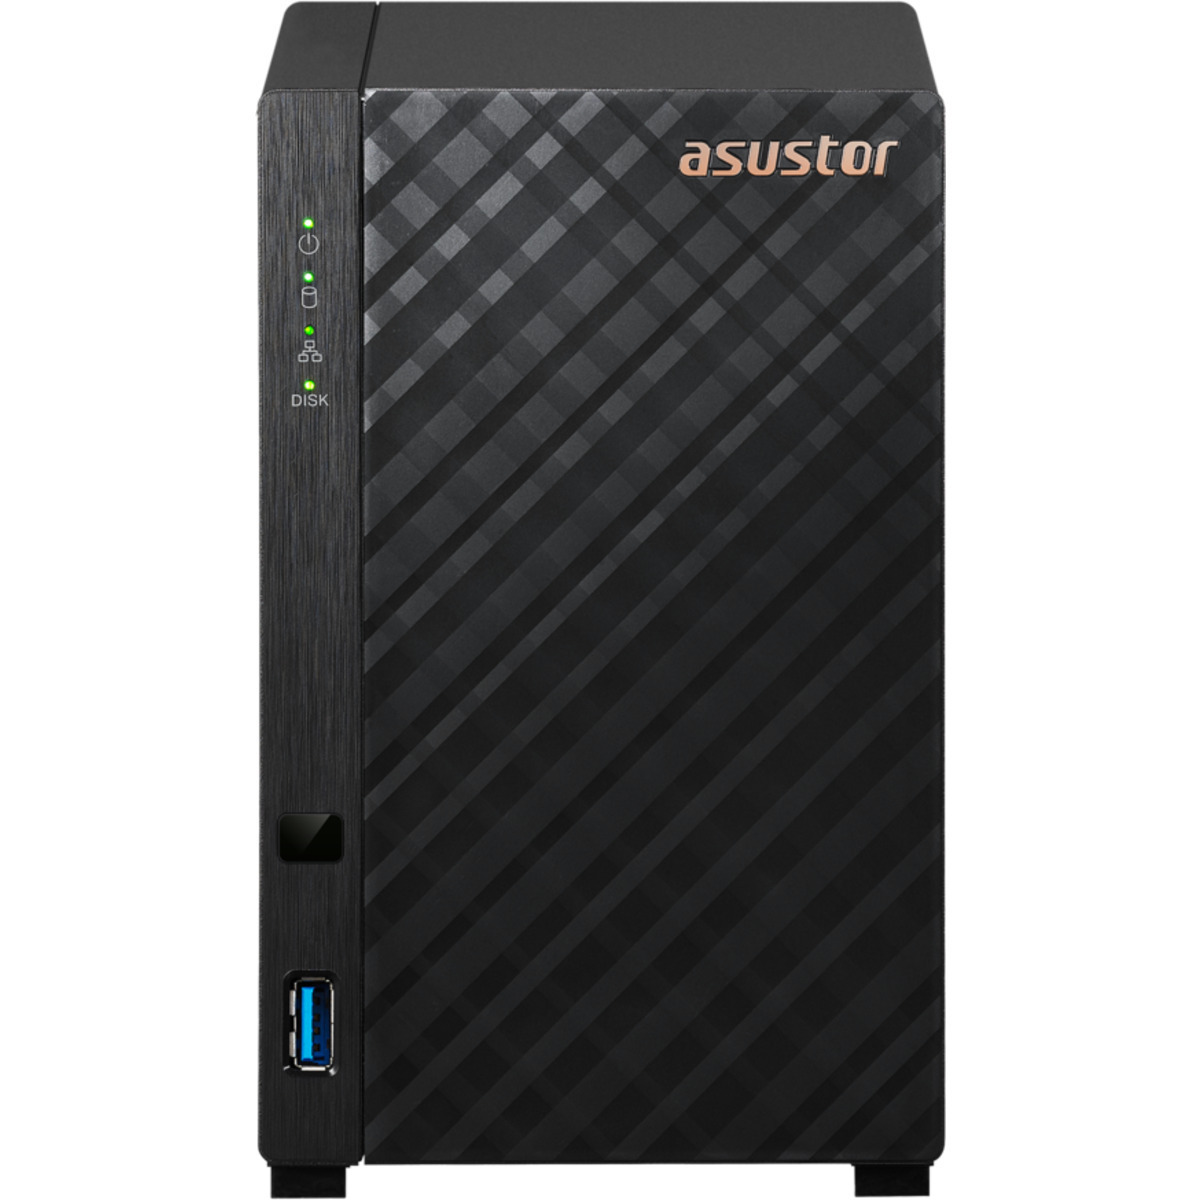 ASUSTOR DRIVESTOR 2 Lite AS1102TL 24tb 2-Bay Desktop Personal / Basic Home / Small Office NAS - Network Attached Storage Device 2x12tb Seagate IronWolf Pro ST12000NT001 3.5 7200rpm SATA 6Gb/s HDD NAS Class Drives Installed - Burn-In Tested - ON SALE DRIVESTOR 2 Lite AS1102TL